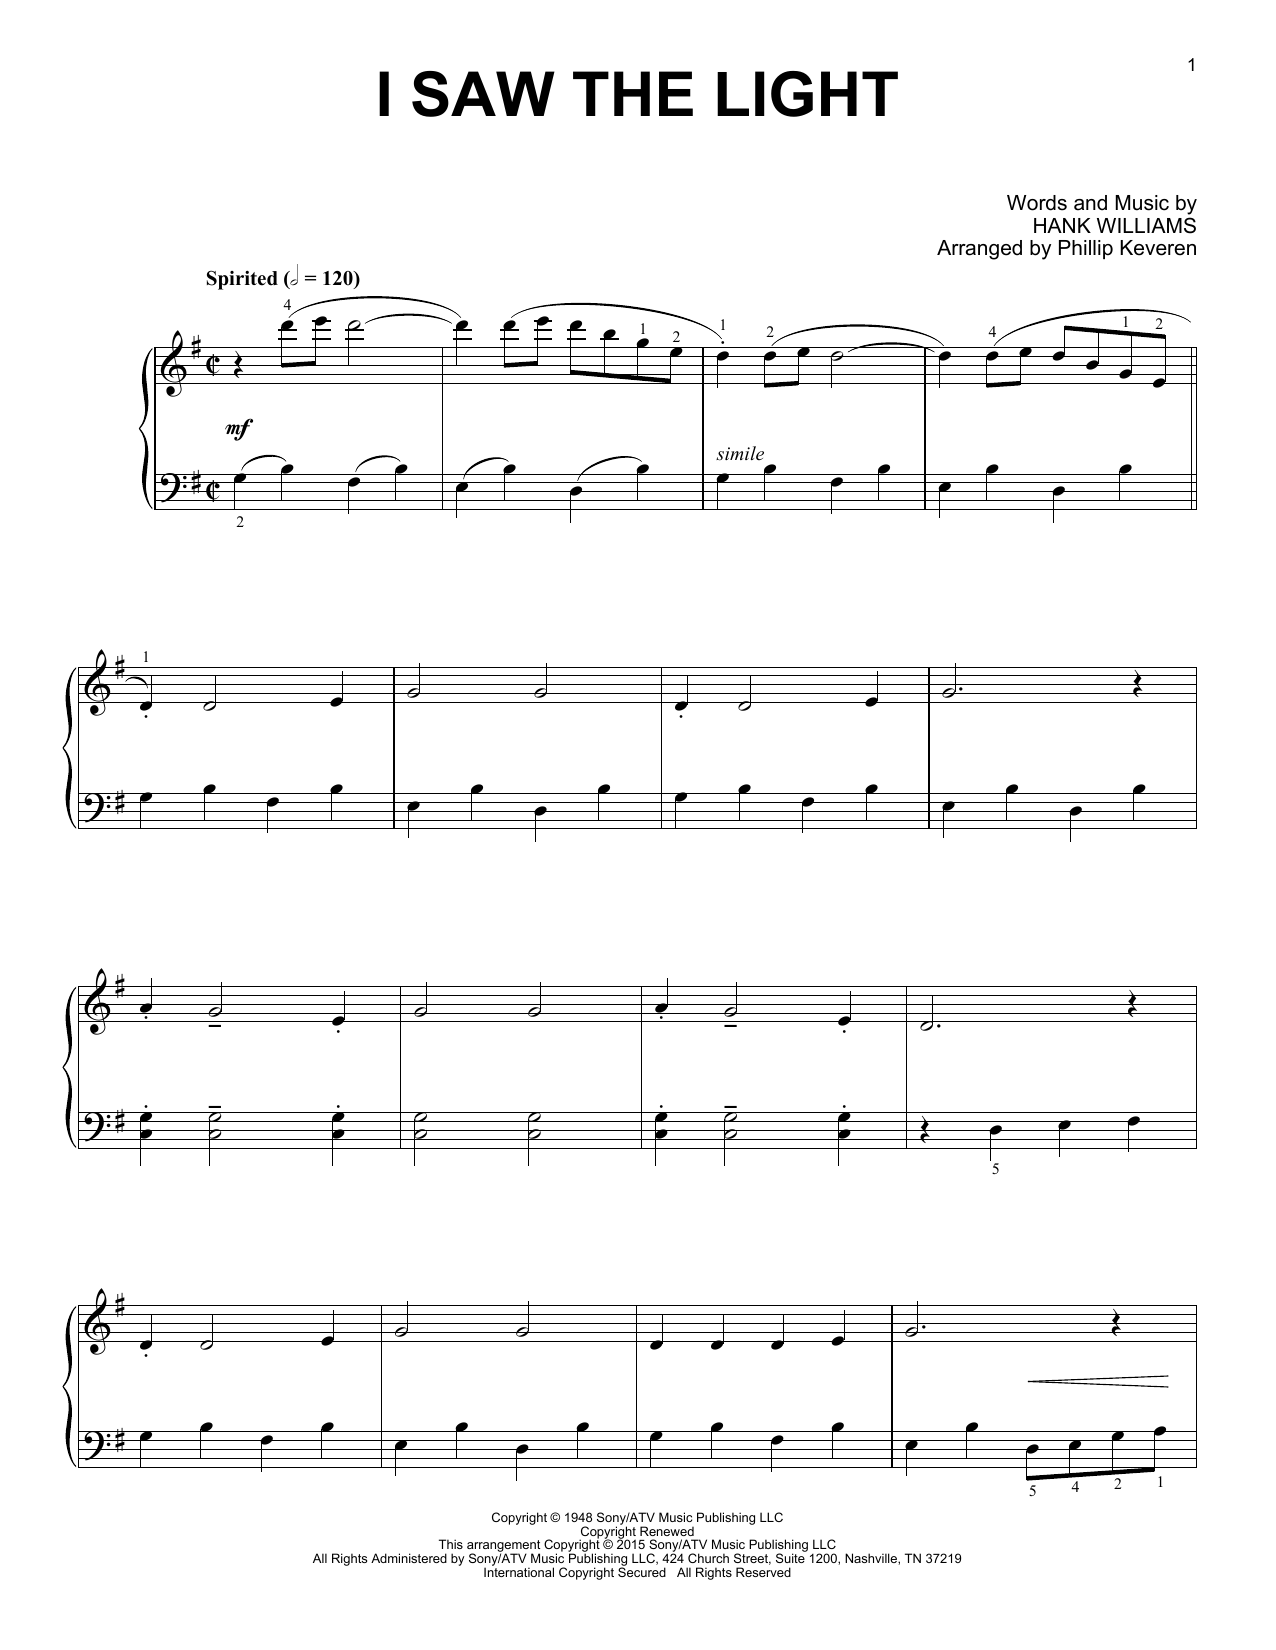 Download Hank Williams I Saw The Light Sheet Music